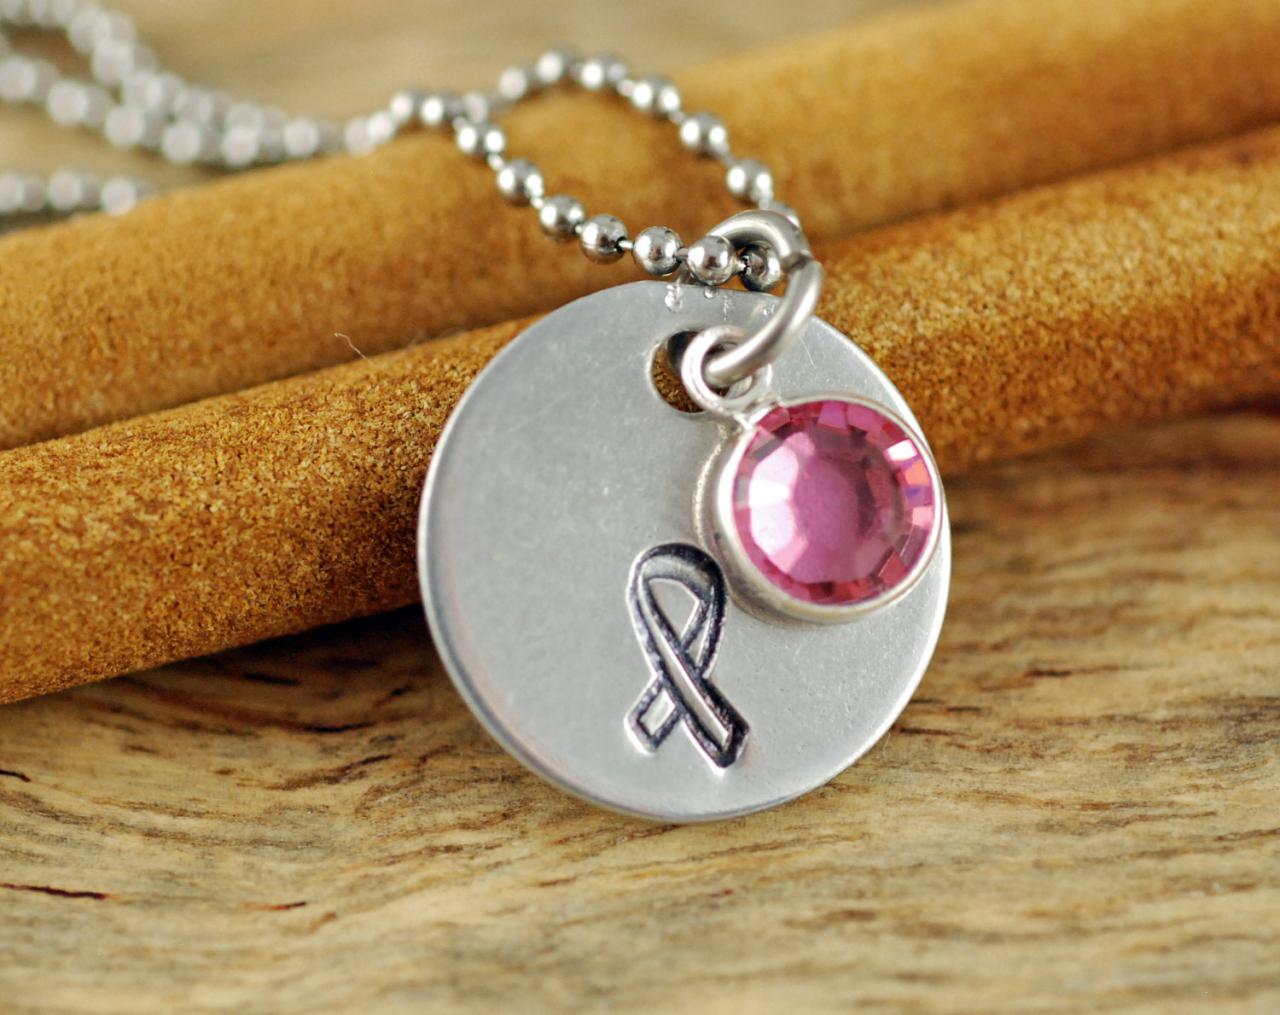 Personalized Hand Stamped Necklace, Breast Cancer Awareness, Hand Stamped Jewelry, Womens Jewelry, Breast Cancer Survivor Necklace